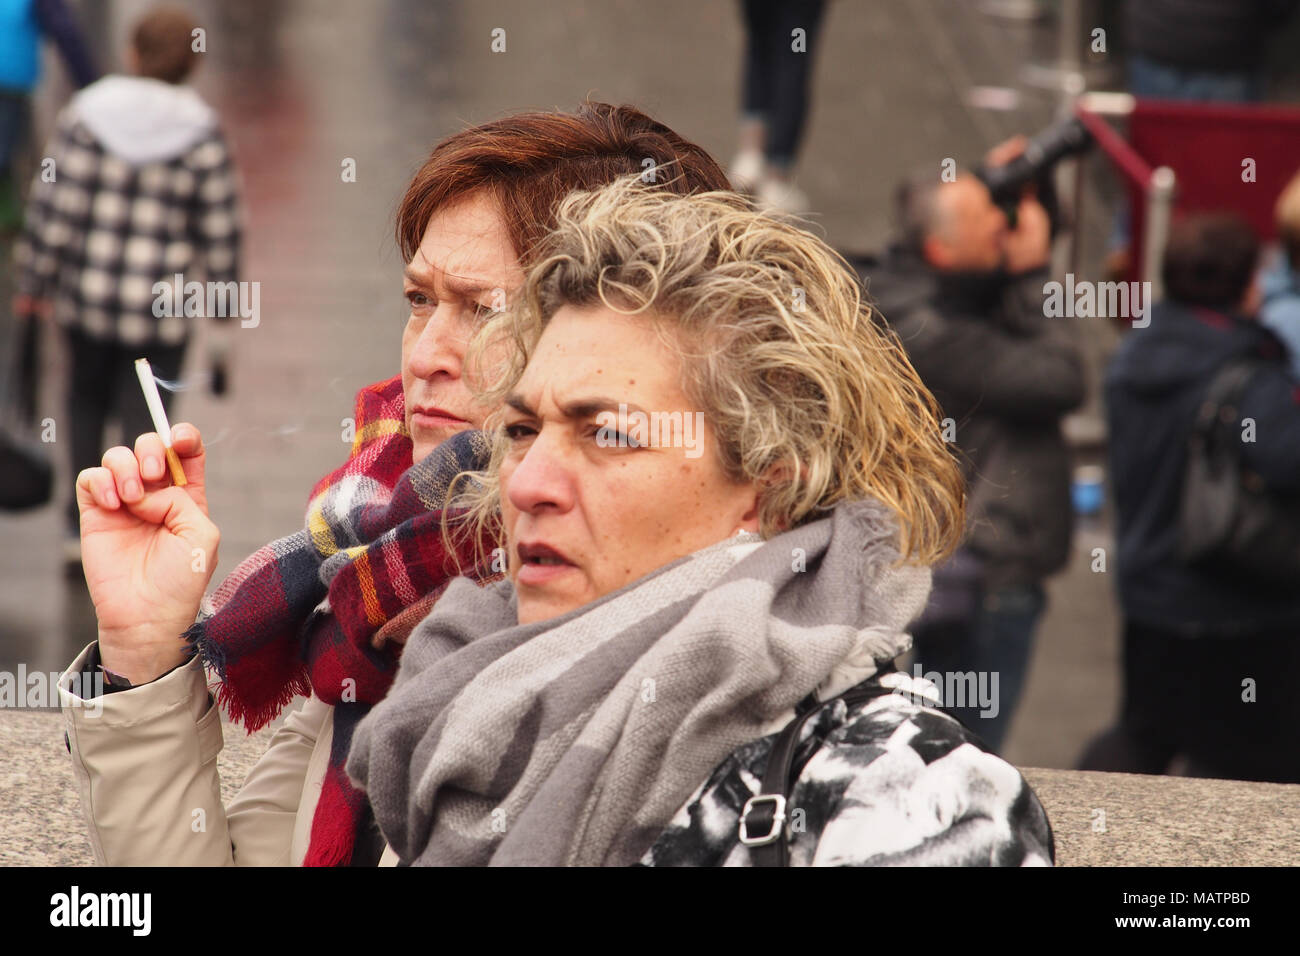 Two women smoking cigarettes sightseeing in London on a cold winter day Stock Photo